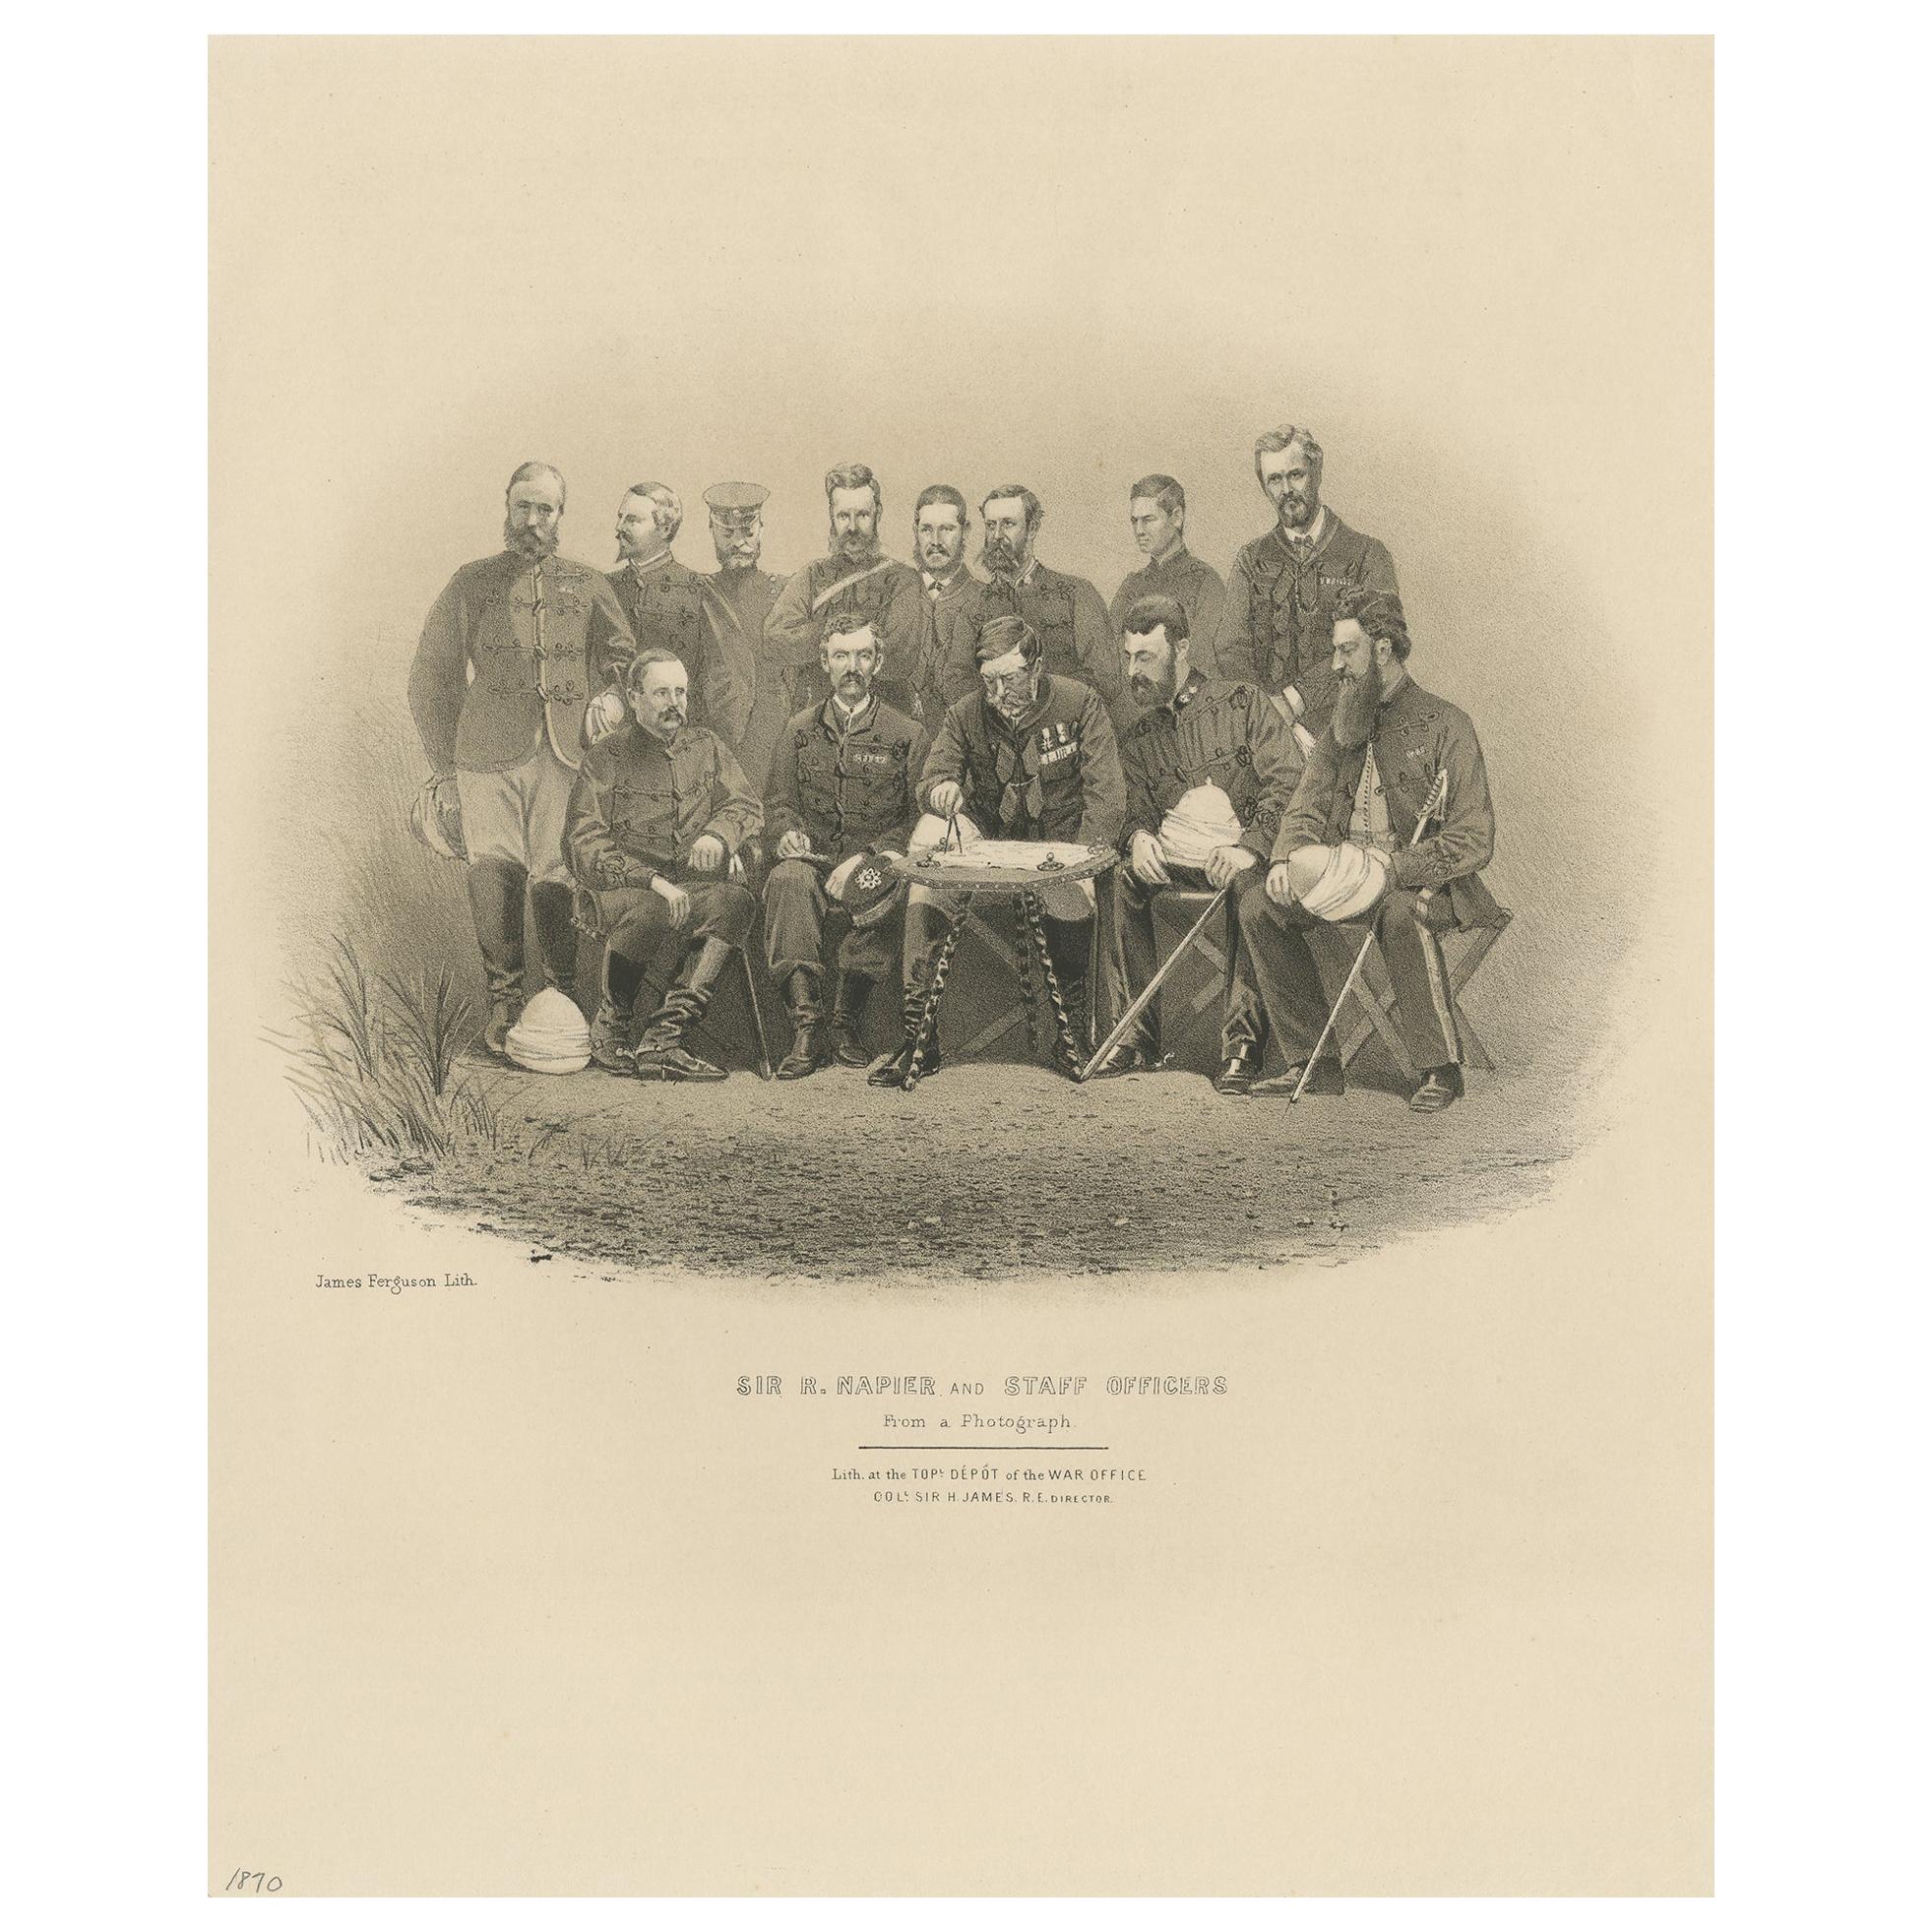 Antique Print of Robert Napier and Staff Officers, 1870